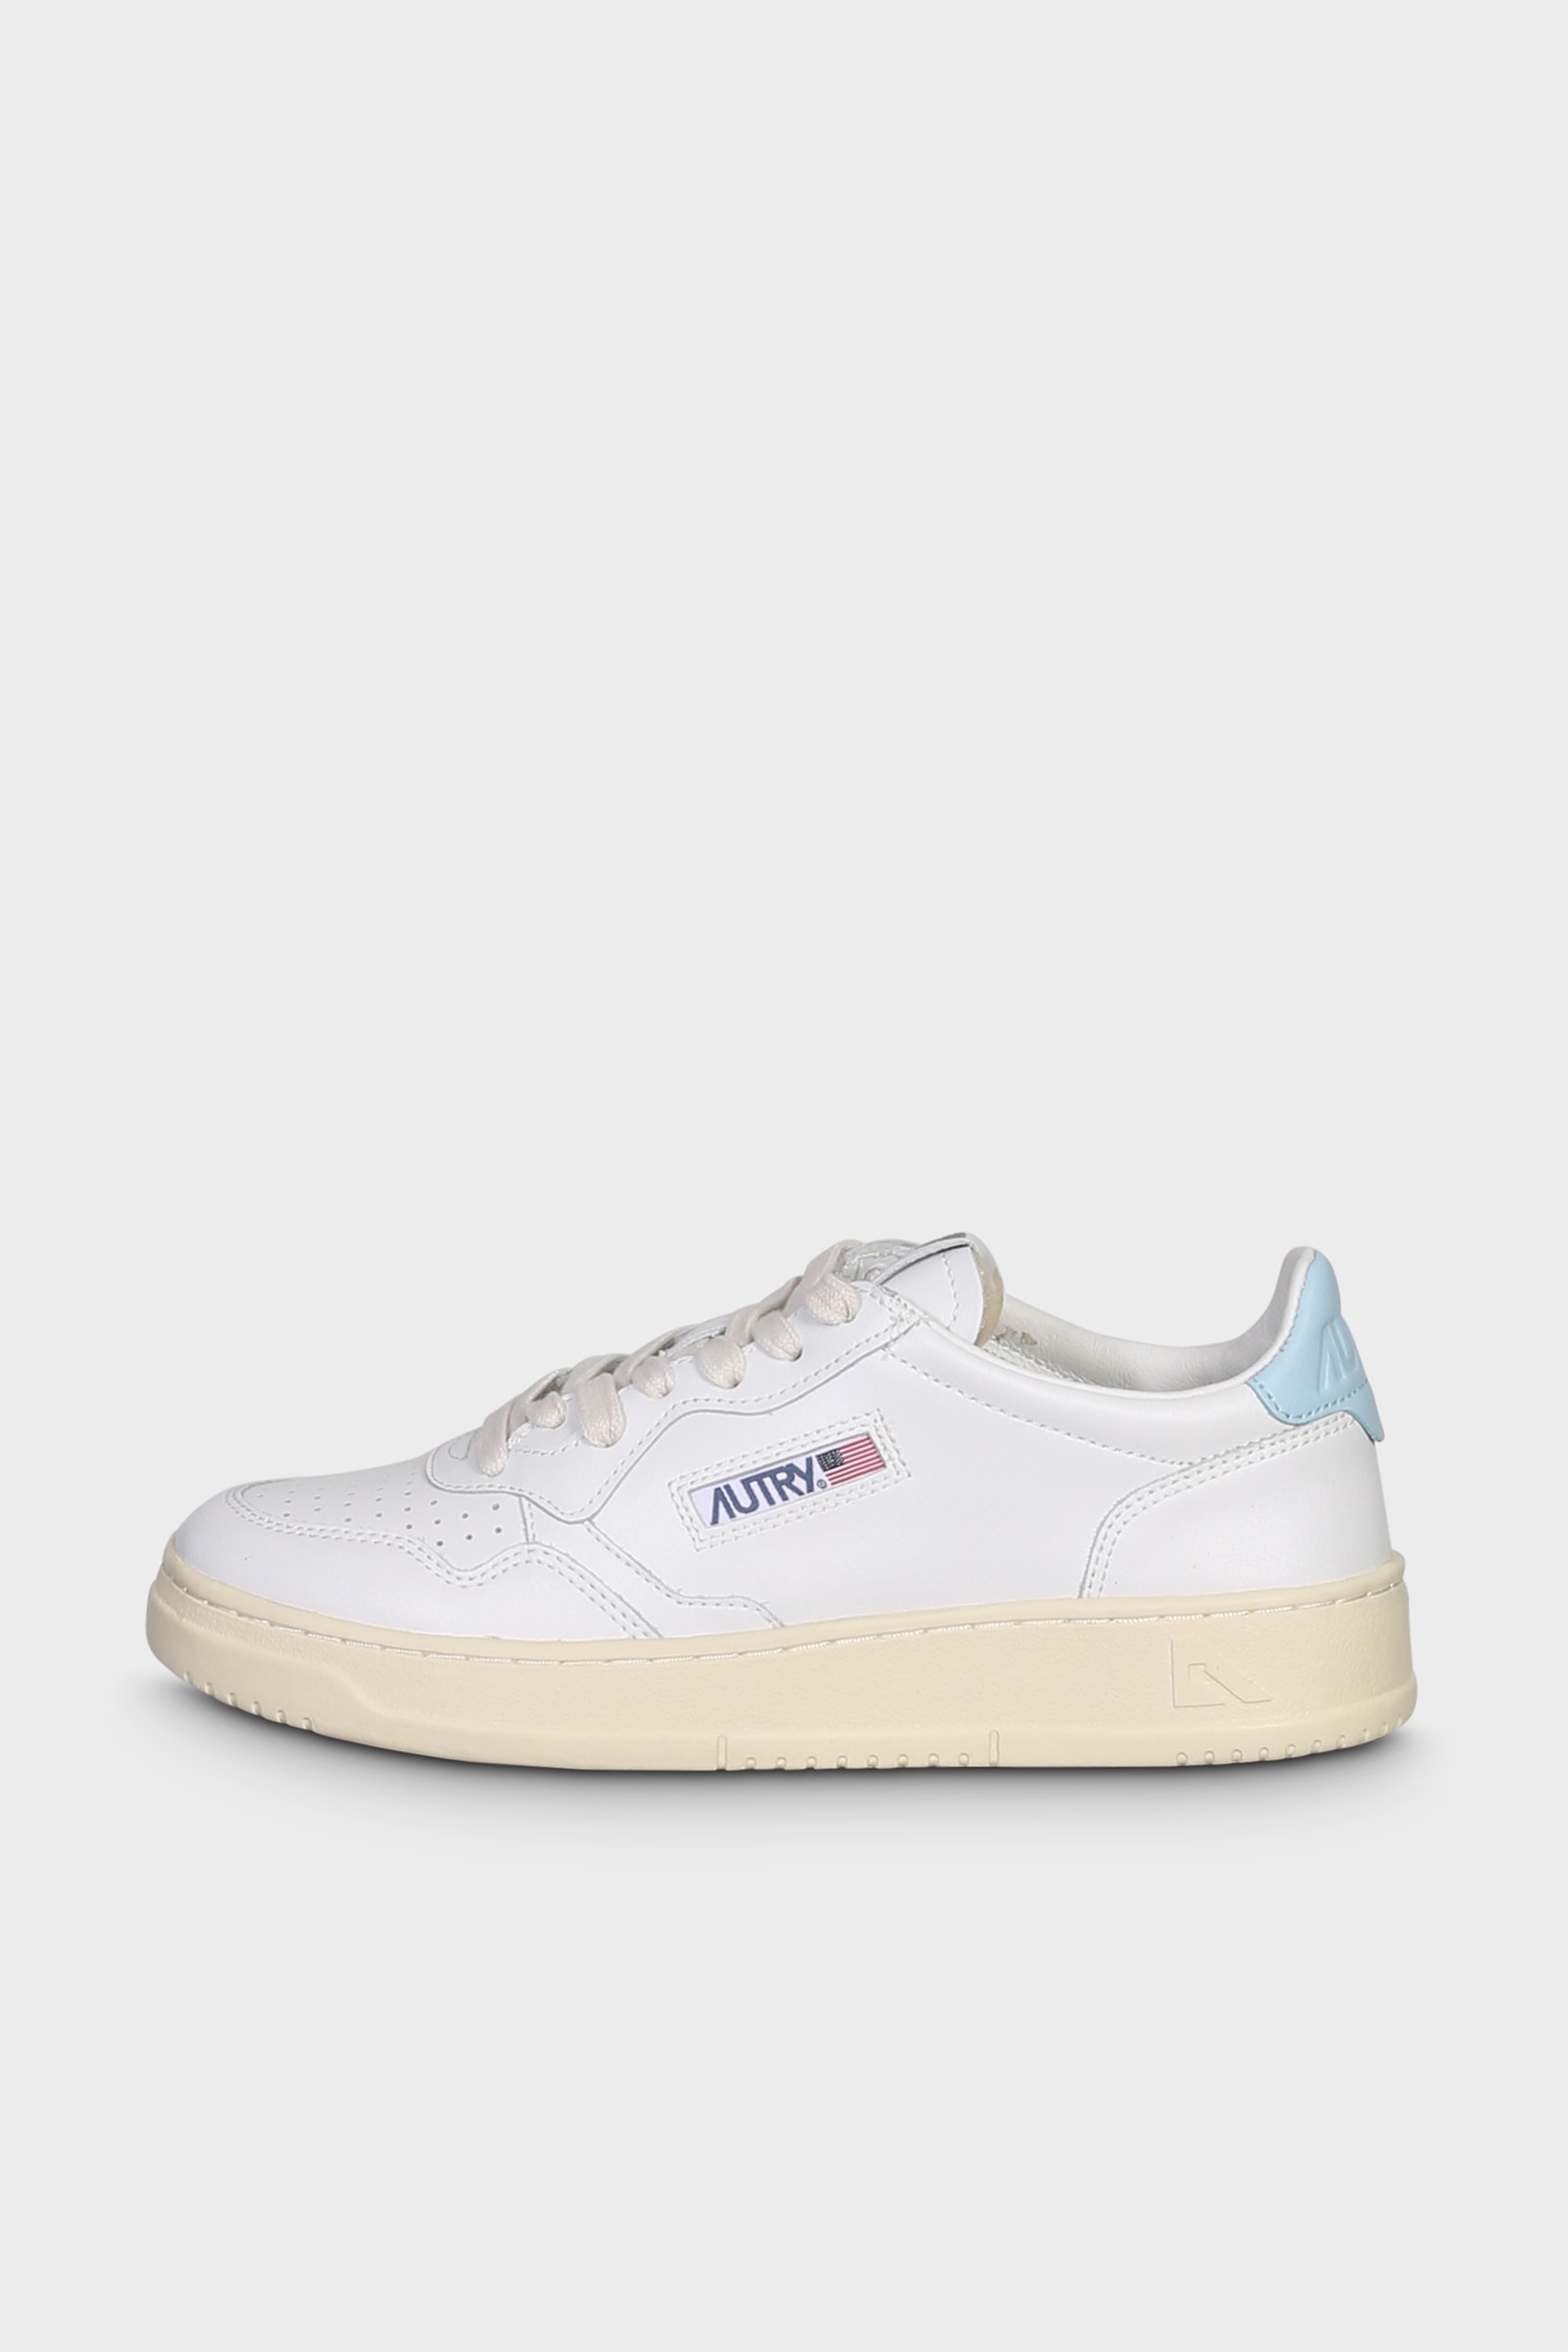 AUTRY ACTION SHOES Medalist Low Sneaker in White/Stream Blue 35